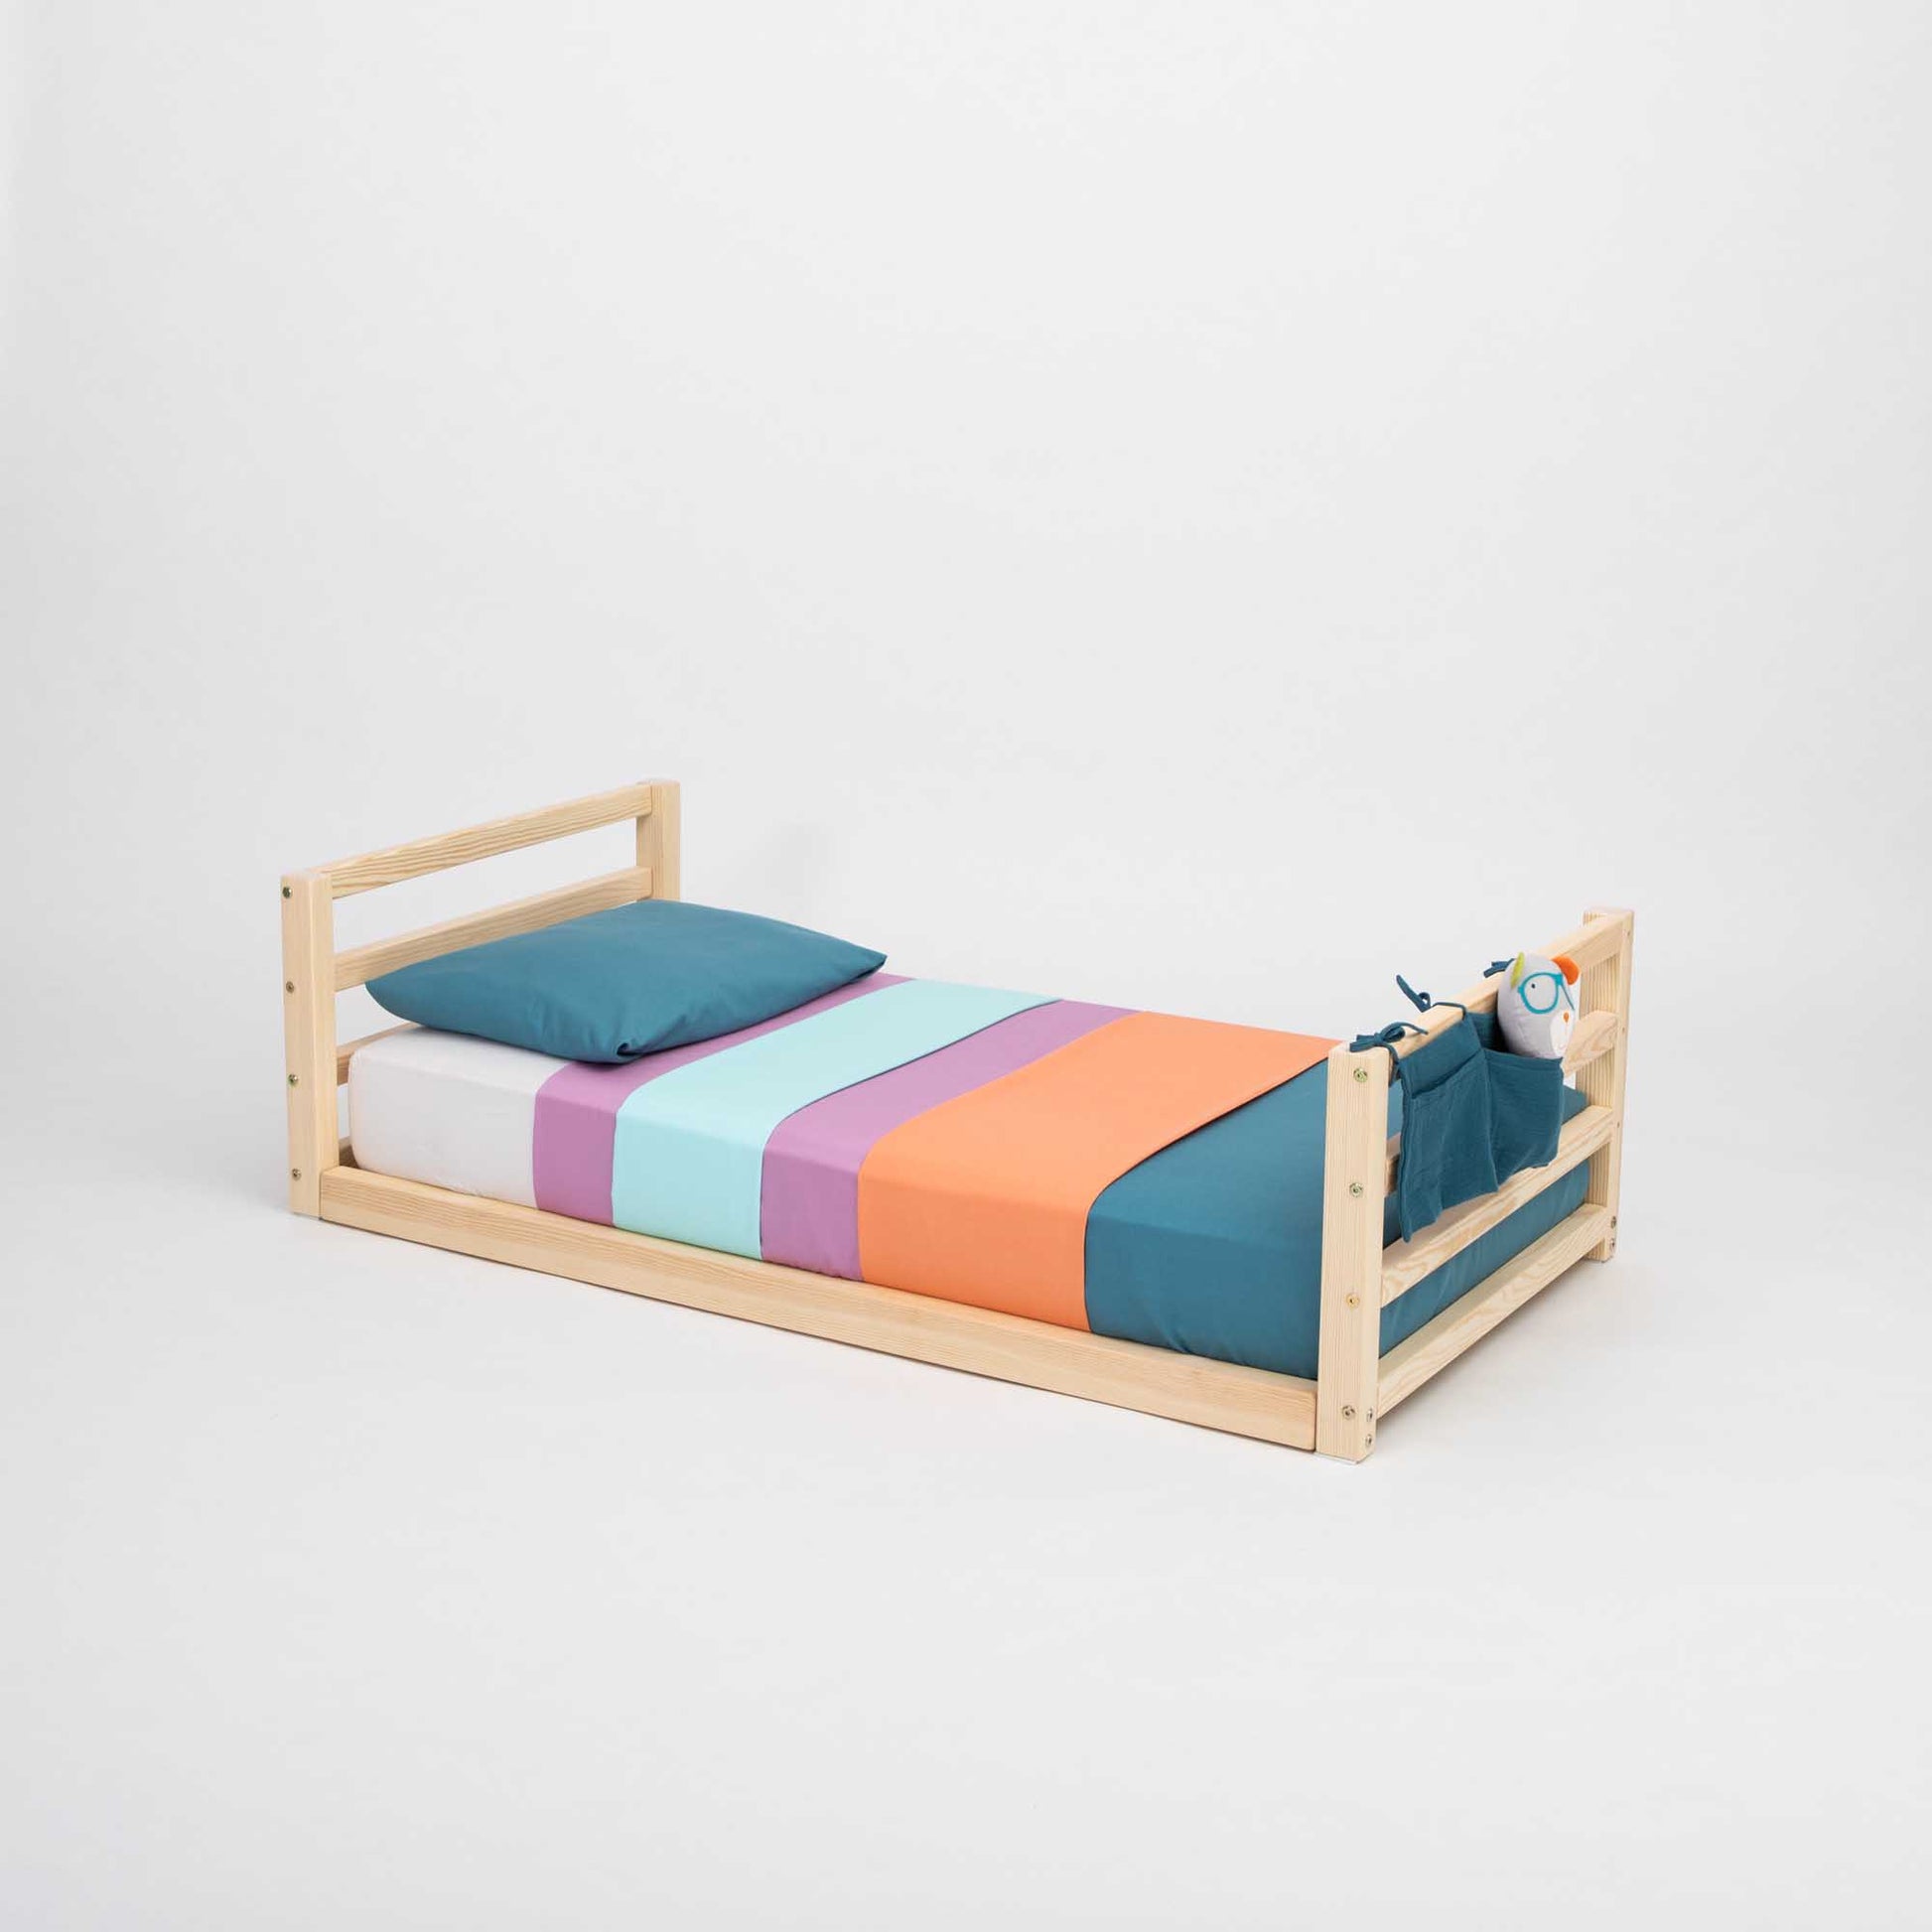 A Sweet Home From Wood toddler floor bed with a horizontal rail headboard and footboard suitable for girls.